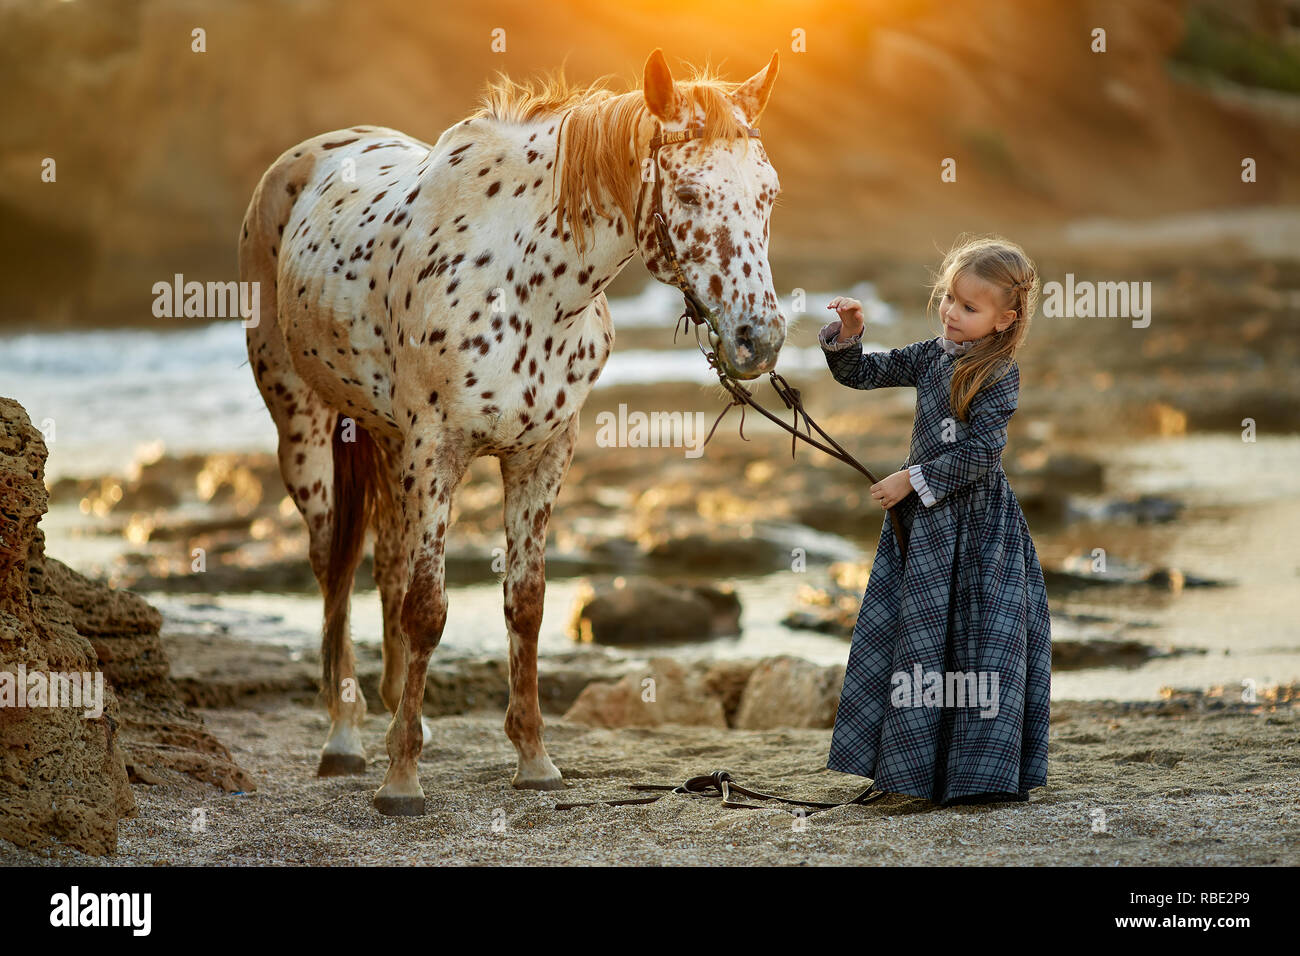 Girl in dress walking with horse  Stock Photo